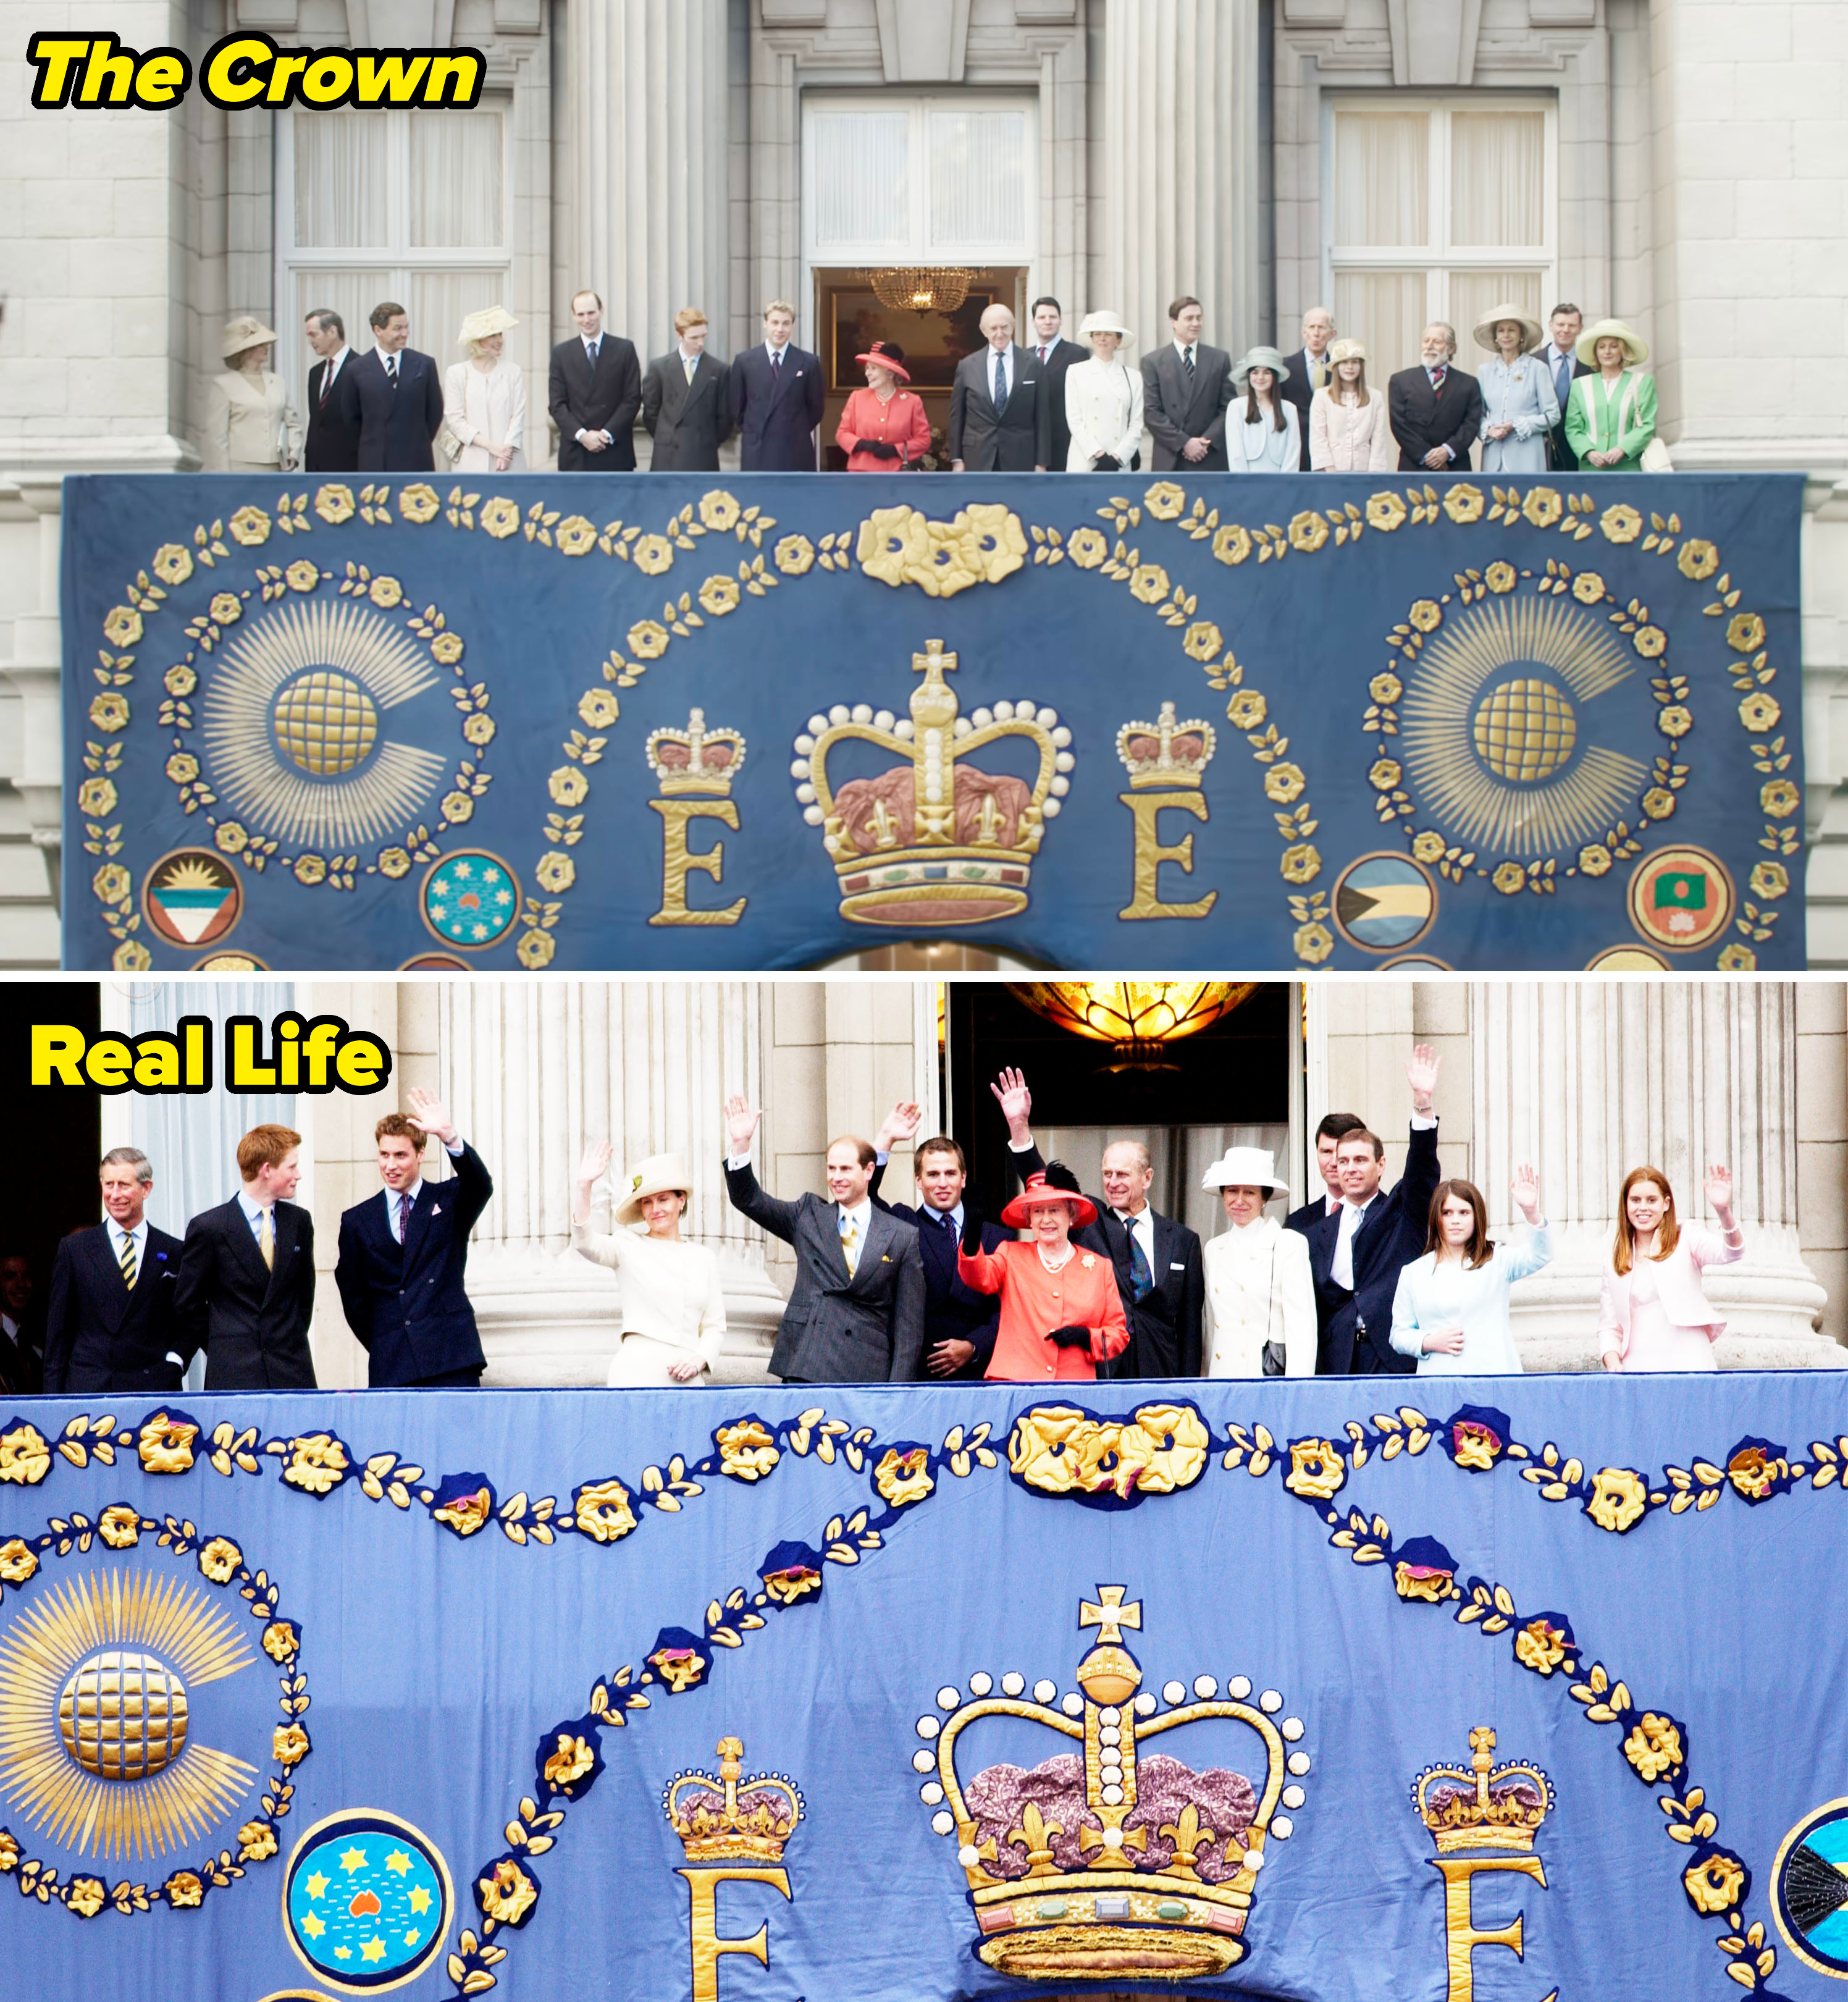 The Royal Family in real life vs. &quot;The Crown&quot;